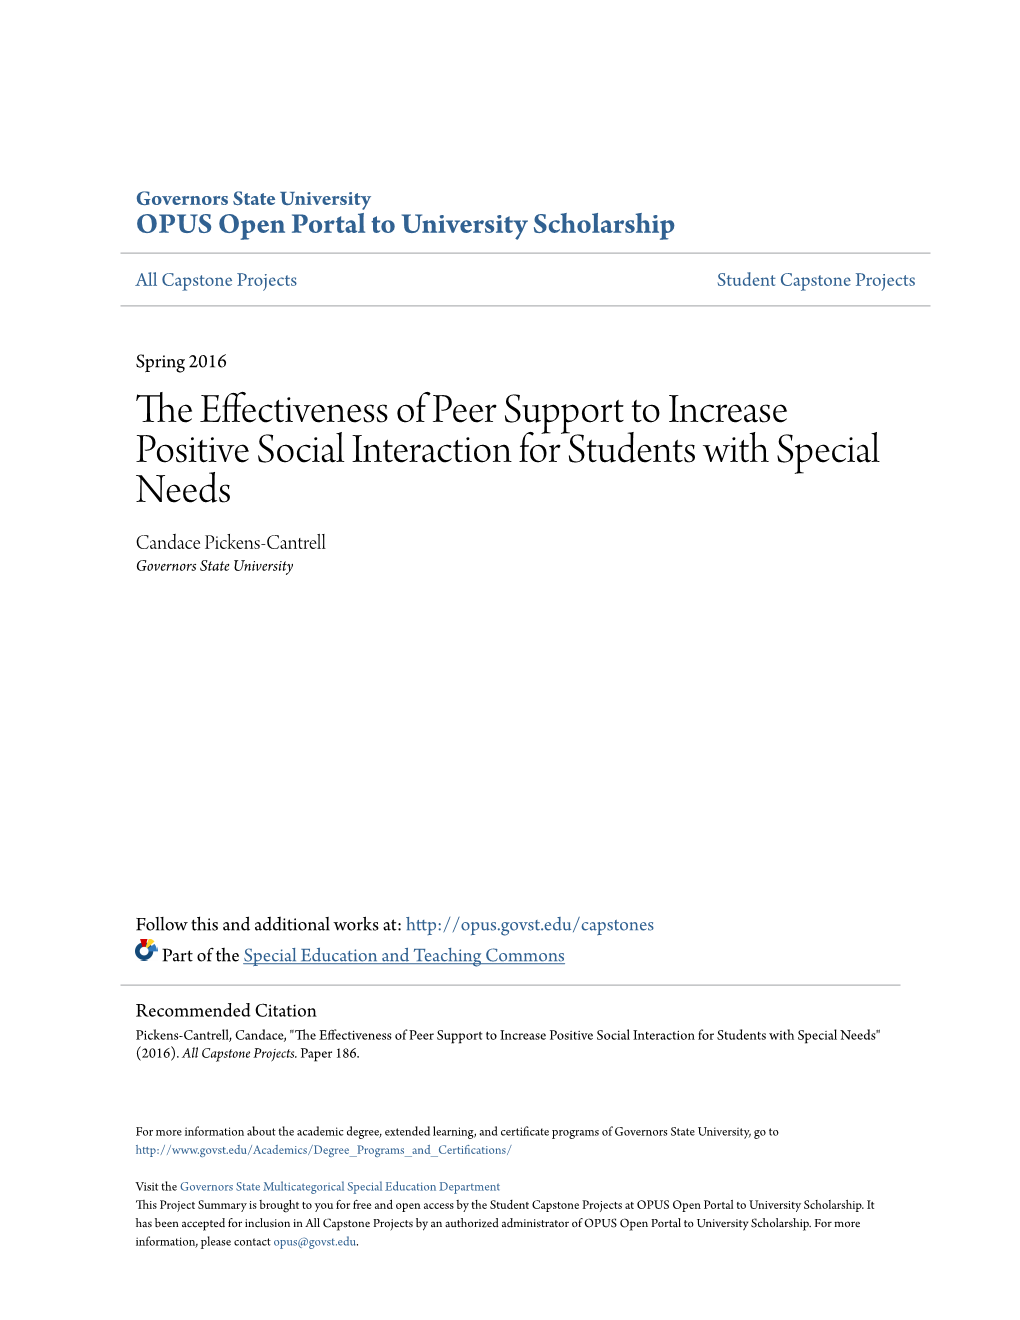 The Effectiveness of Peer Support to Increase Positive Social Interaction for Students with Special Needs" (2016)